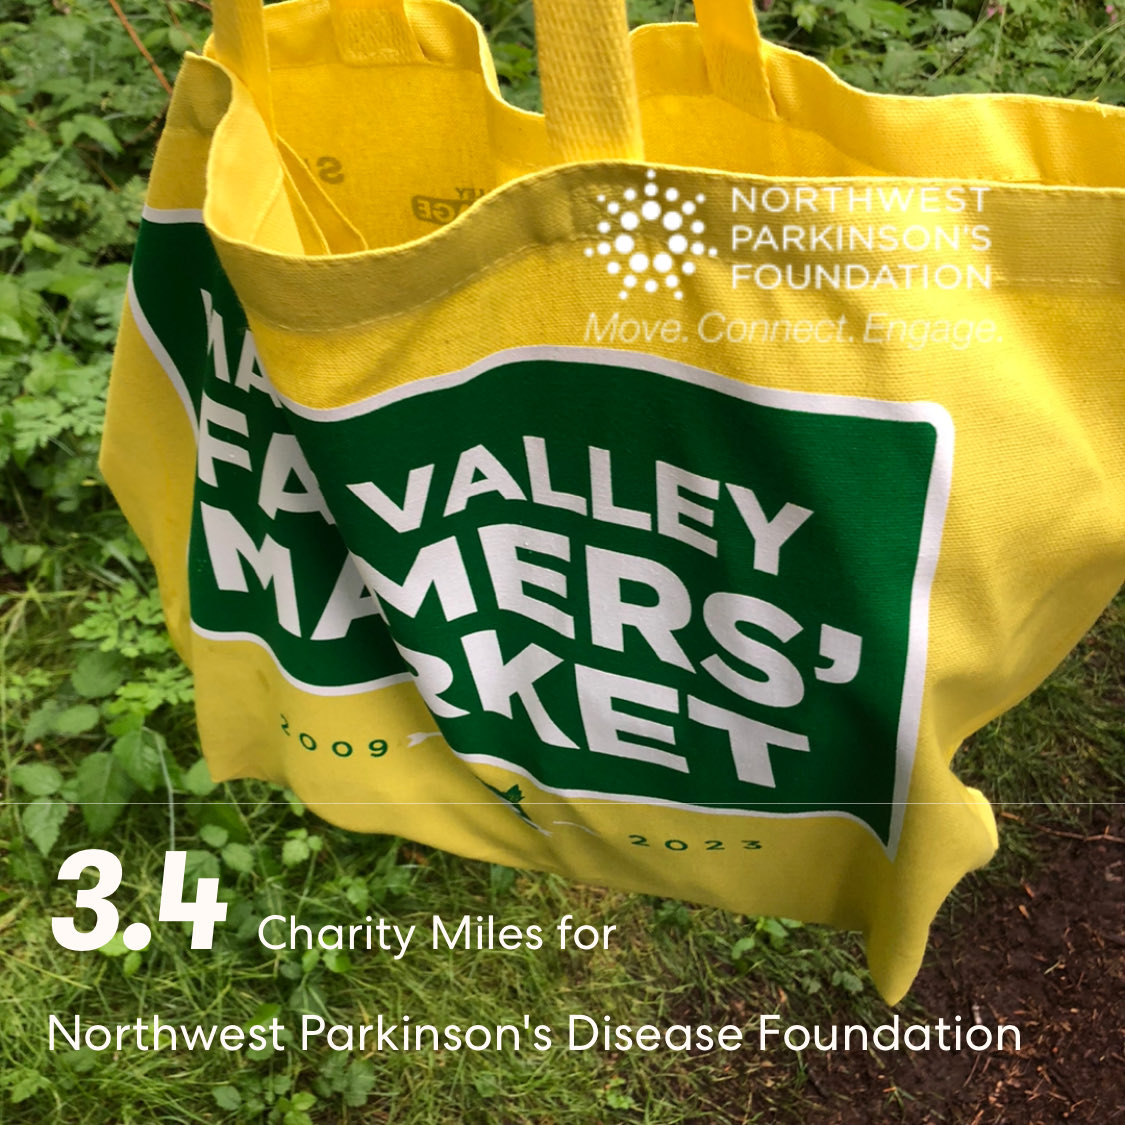 At ⁦@MapleValleyFM⁩ , another 3.4 ⁦@CharityMiles⁩ for ⁦@NWParkinsons in honor of my #Dad⁩ . I’d be grateful for your support. If you’re in a position to do so, please click here to sponsor me.
miles.app.link/e/8Kp9ZaXhIAb